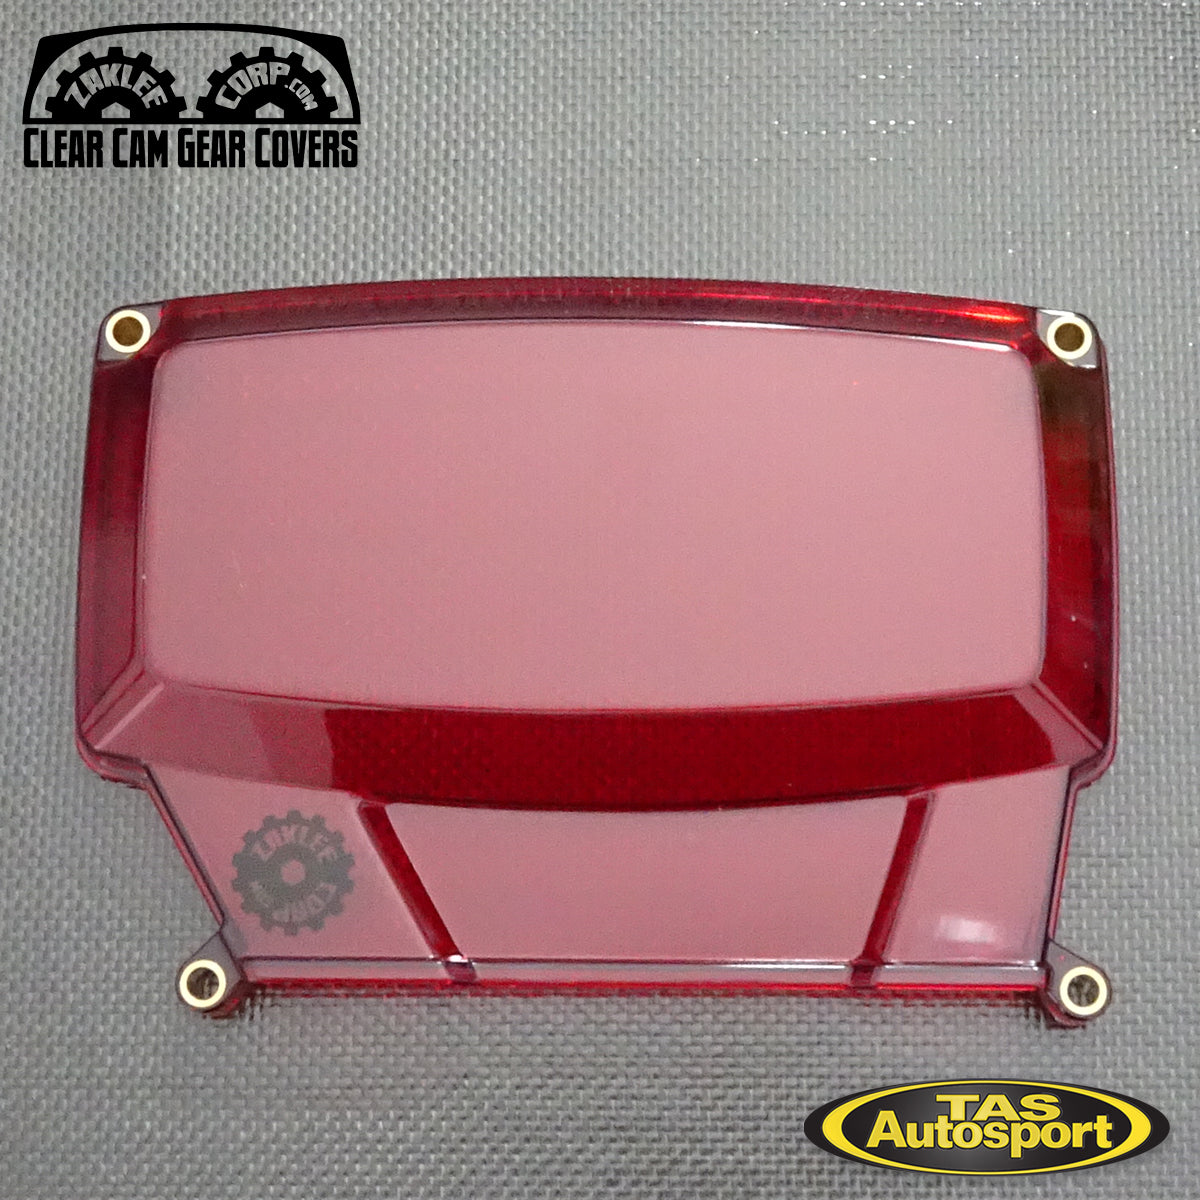 Nissan RB25 Clear Cam Gear Cover - Zaklee Corp.